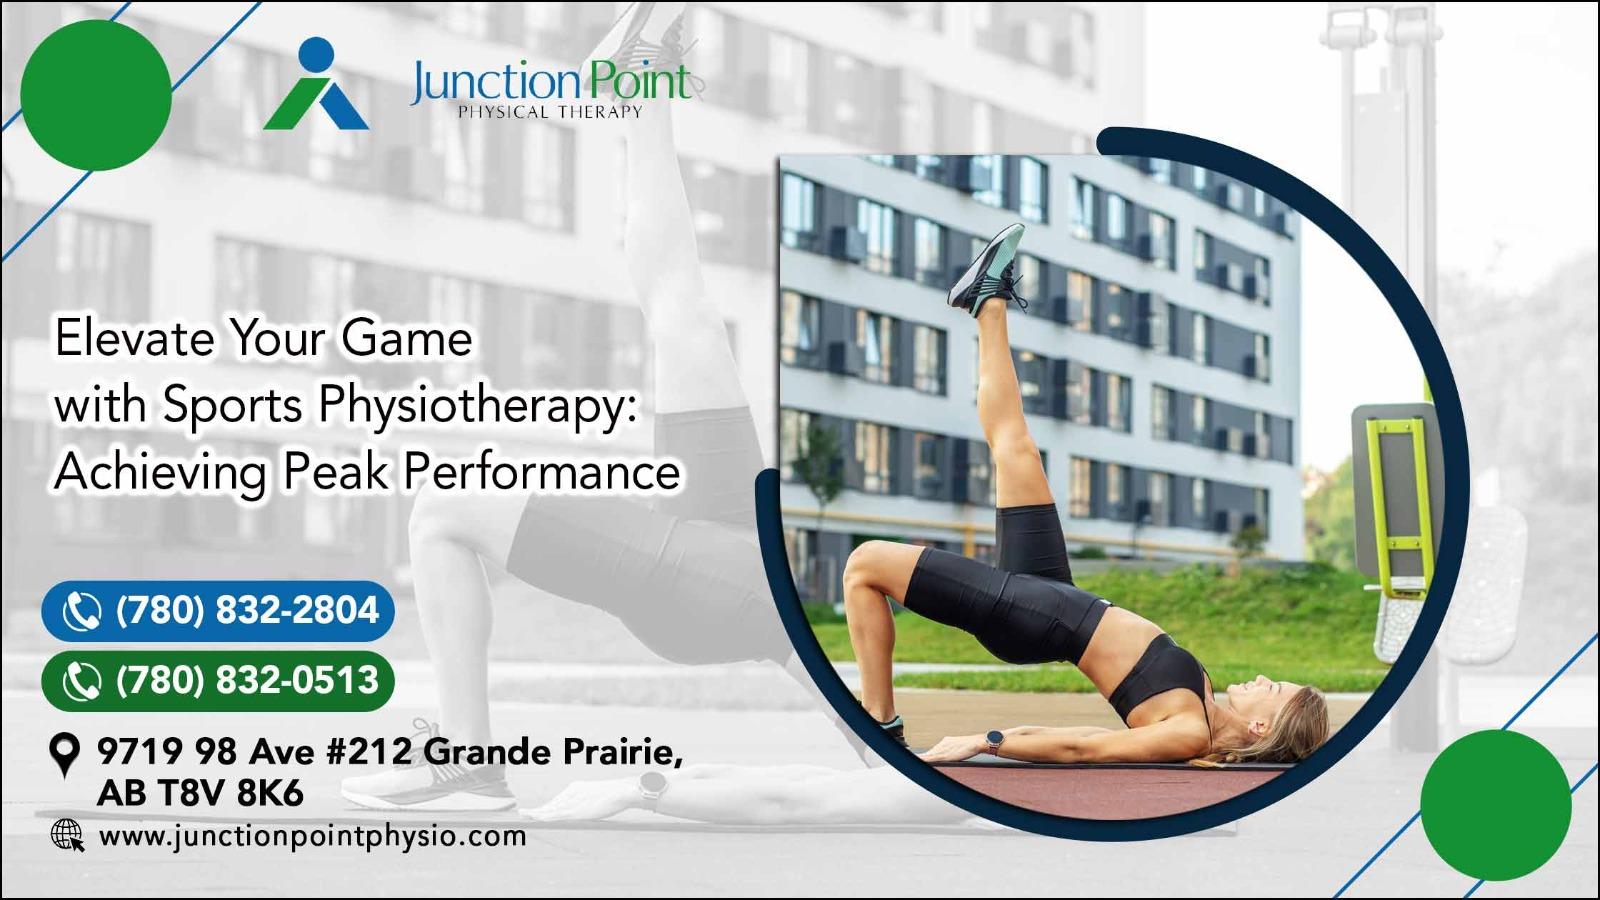 Elevate Your Game with Sports Physiotherapy Achieving Peak Performance